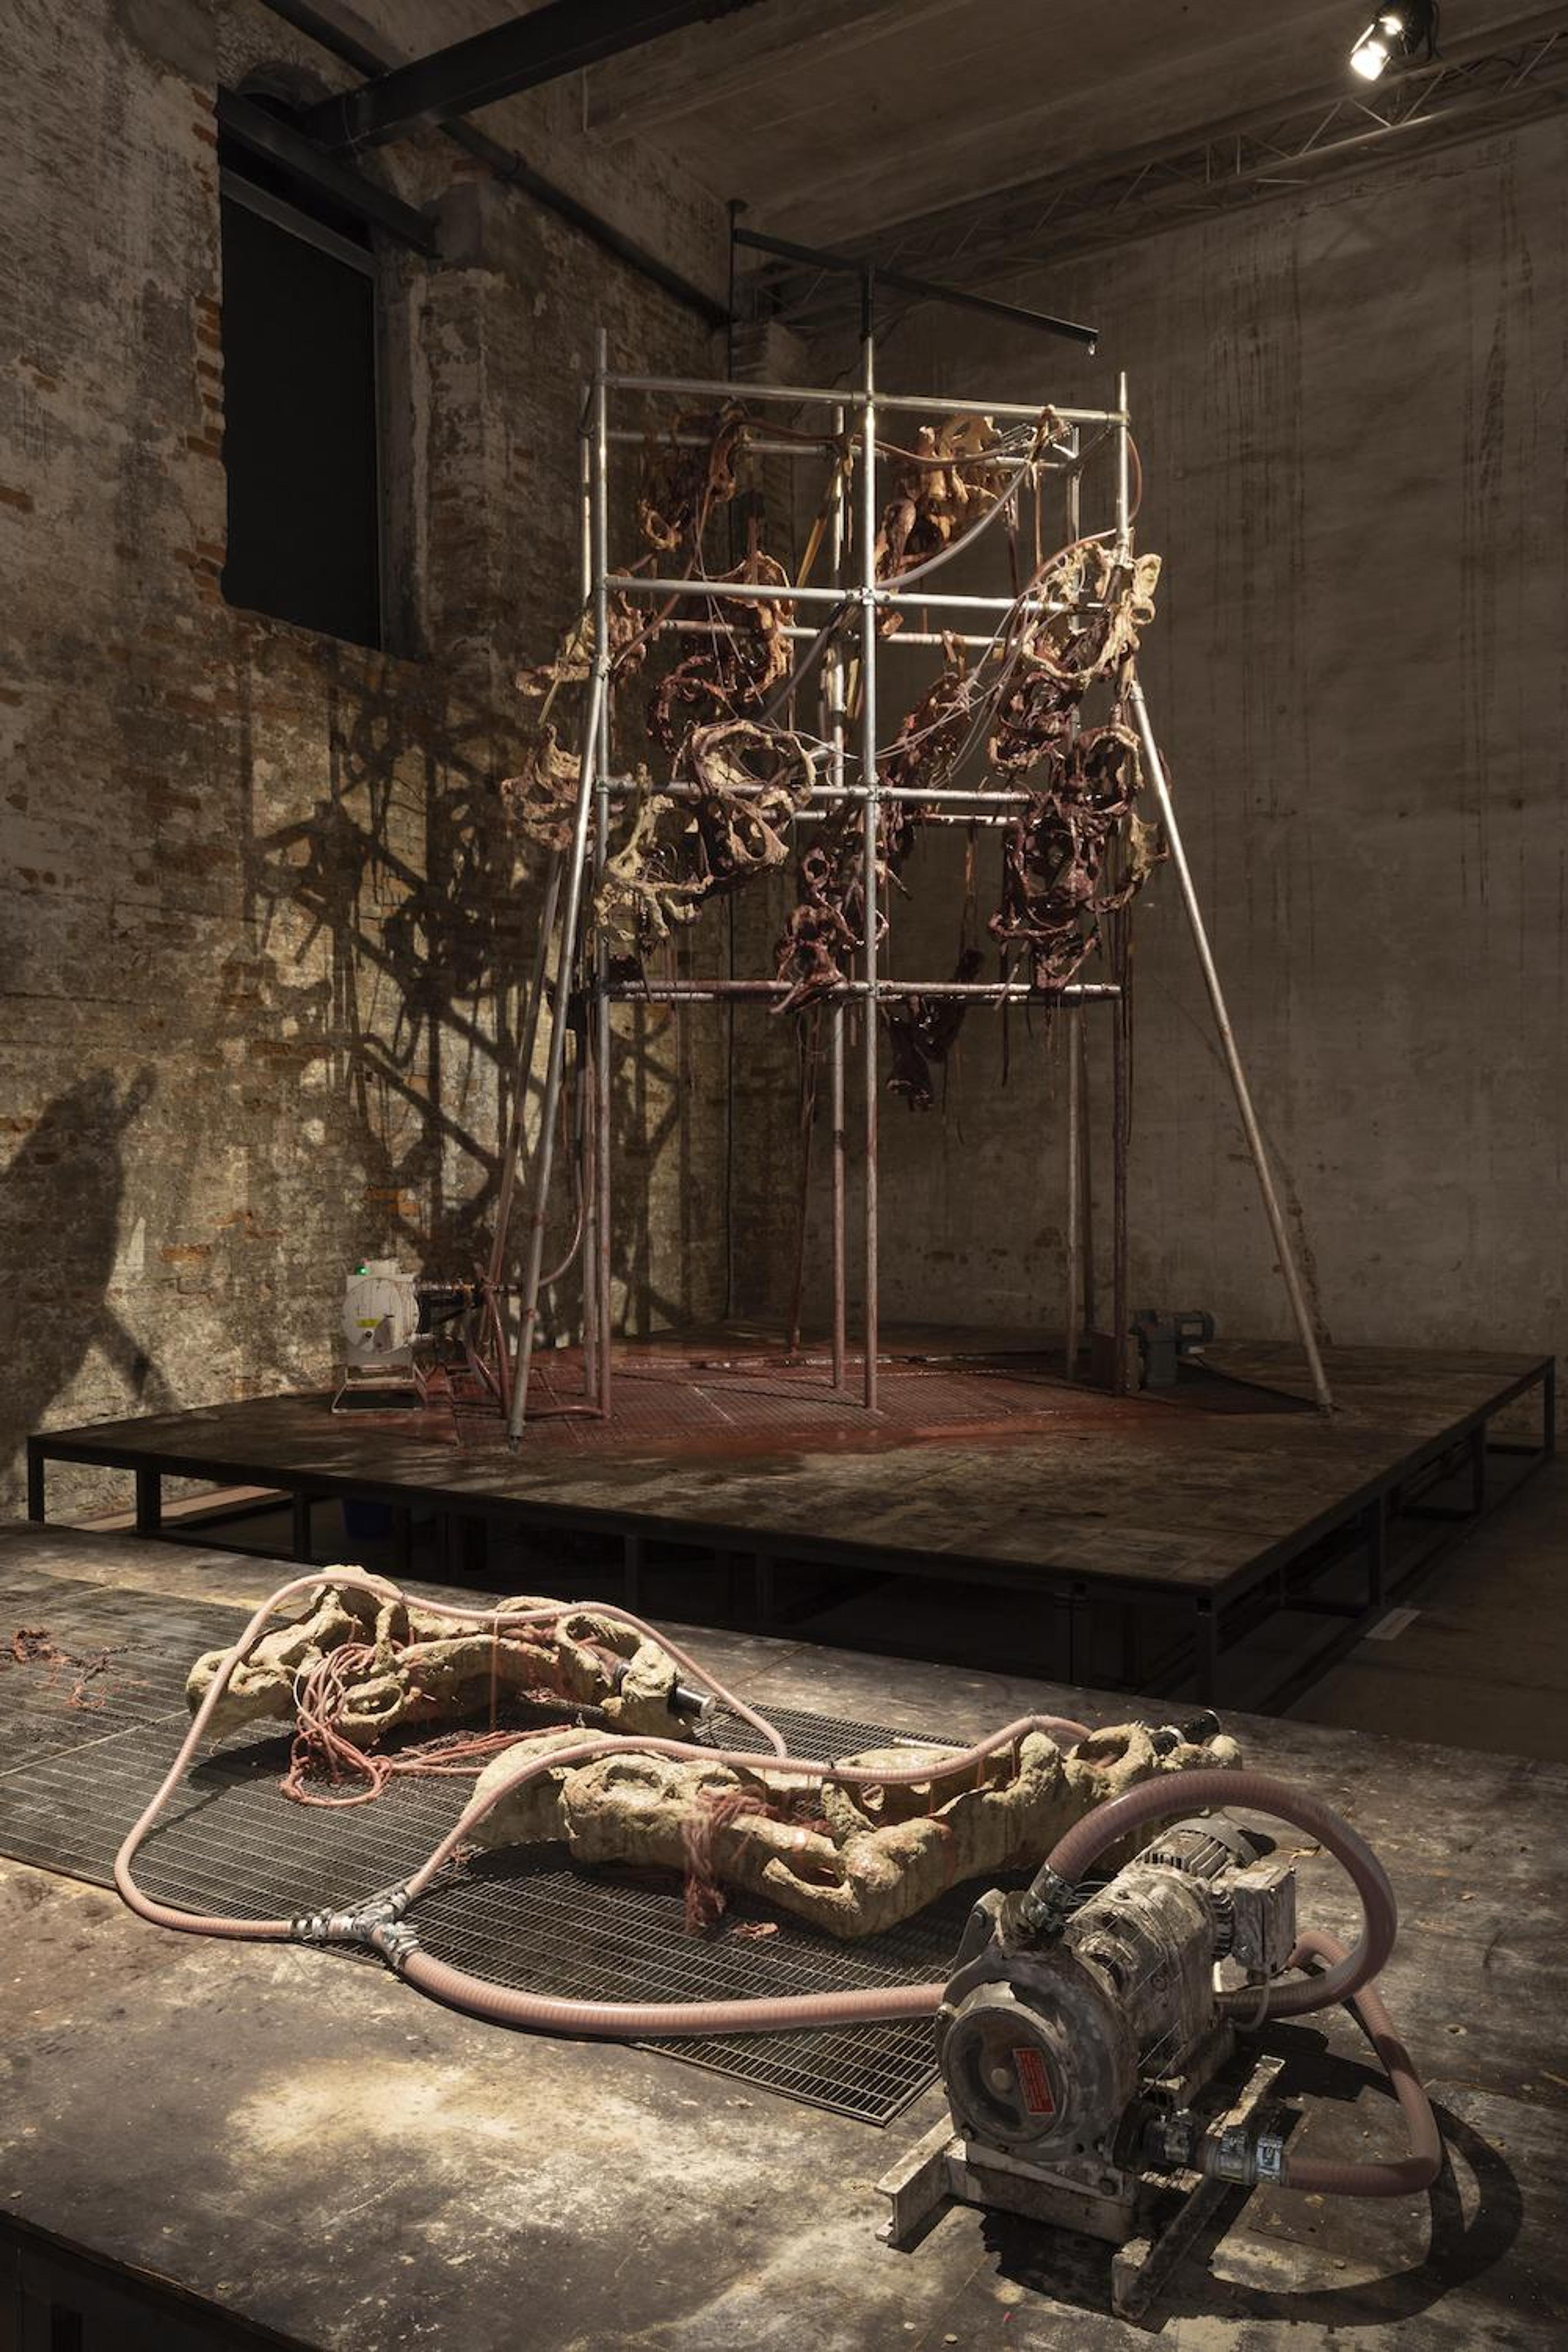 Mire Lee, Endless House: Holes and Drips , 2022, multiple ceramic sculptures on a scaffold, lithium carbonate and iron oxide glaze liquid, pump, motor and other mixed media, 1.8 x 2 x 4 m